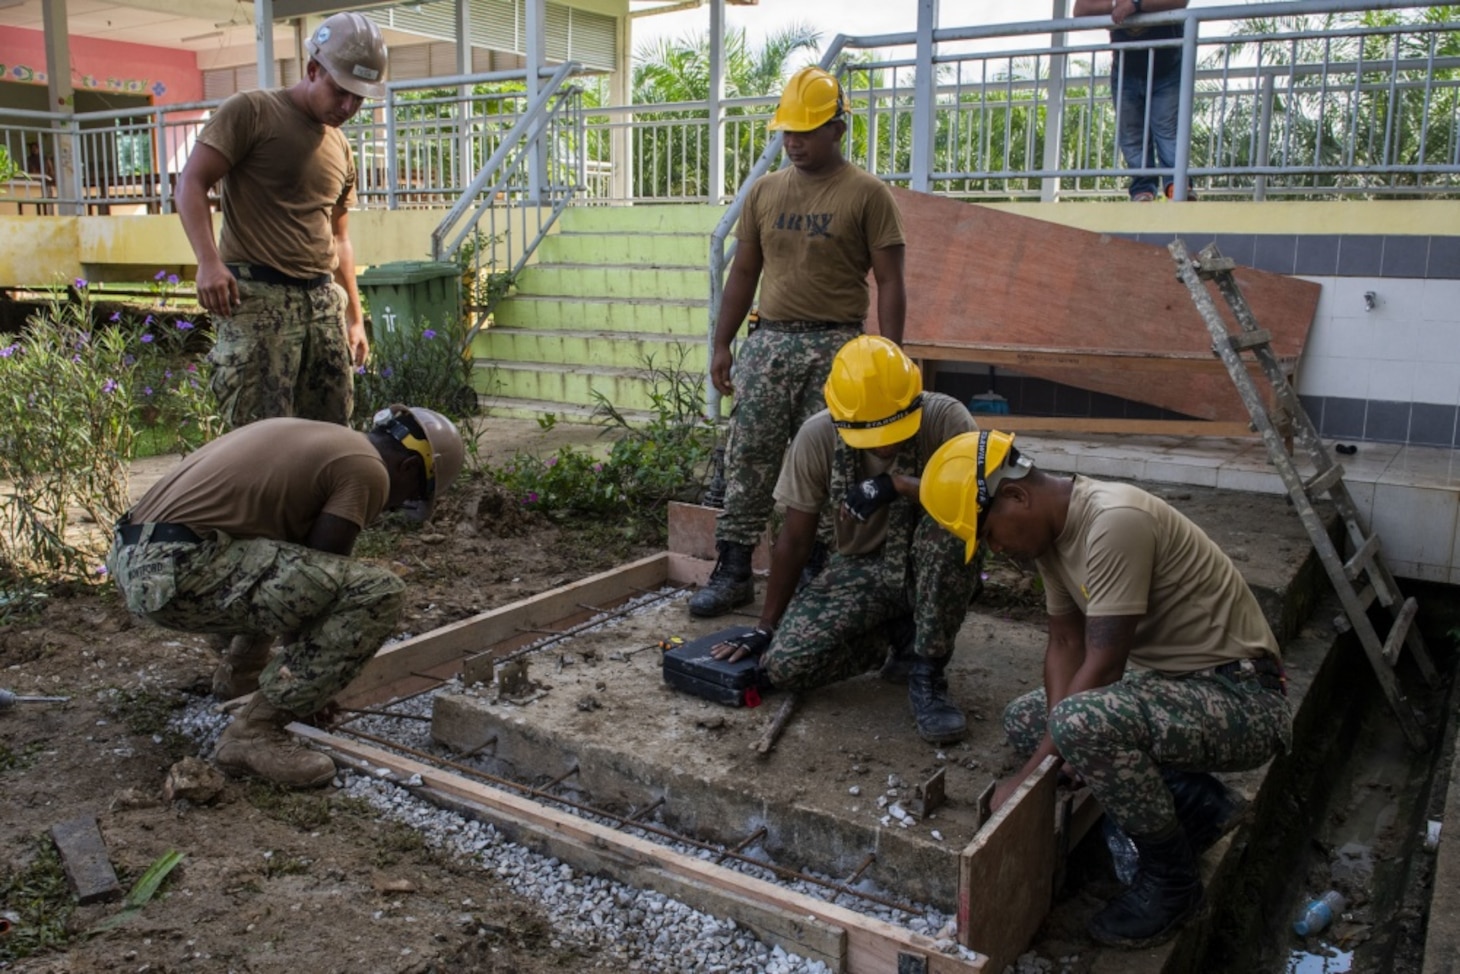 KUCHING, Malaysia (April 5, 2019) – Malaysian Armed Forces and U.S. Navy Seabees place rebar in a concrete footing as part of a Pacific Partnership 2019 water tank restoration project at Tanah Puteh Elementary School. Pacific Partnership, now in its 14th iteration, is the largest annual multinational humanitarian assistance and disaster relief preparedness mission conducted in the Indo-Pacific. Each year the mission team works collectively with host and partner nations to enhance regional interoperability and disaster response capabilities, increase security and stability in the region, and foster new and enduring friendships in the Indo-Pacific. (U.S. Navy photo by Mass Communication Specialist 1st Class Nathan Carpenter)